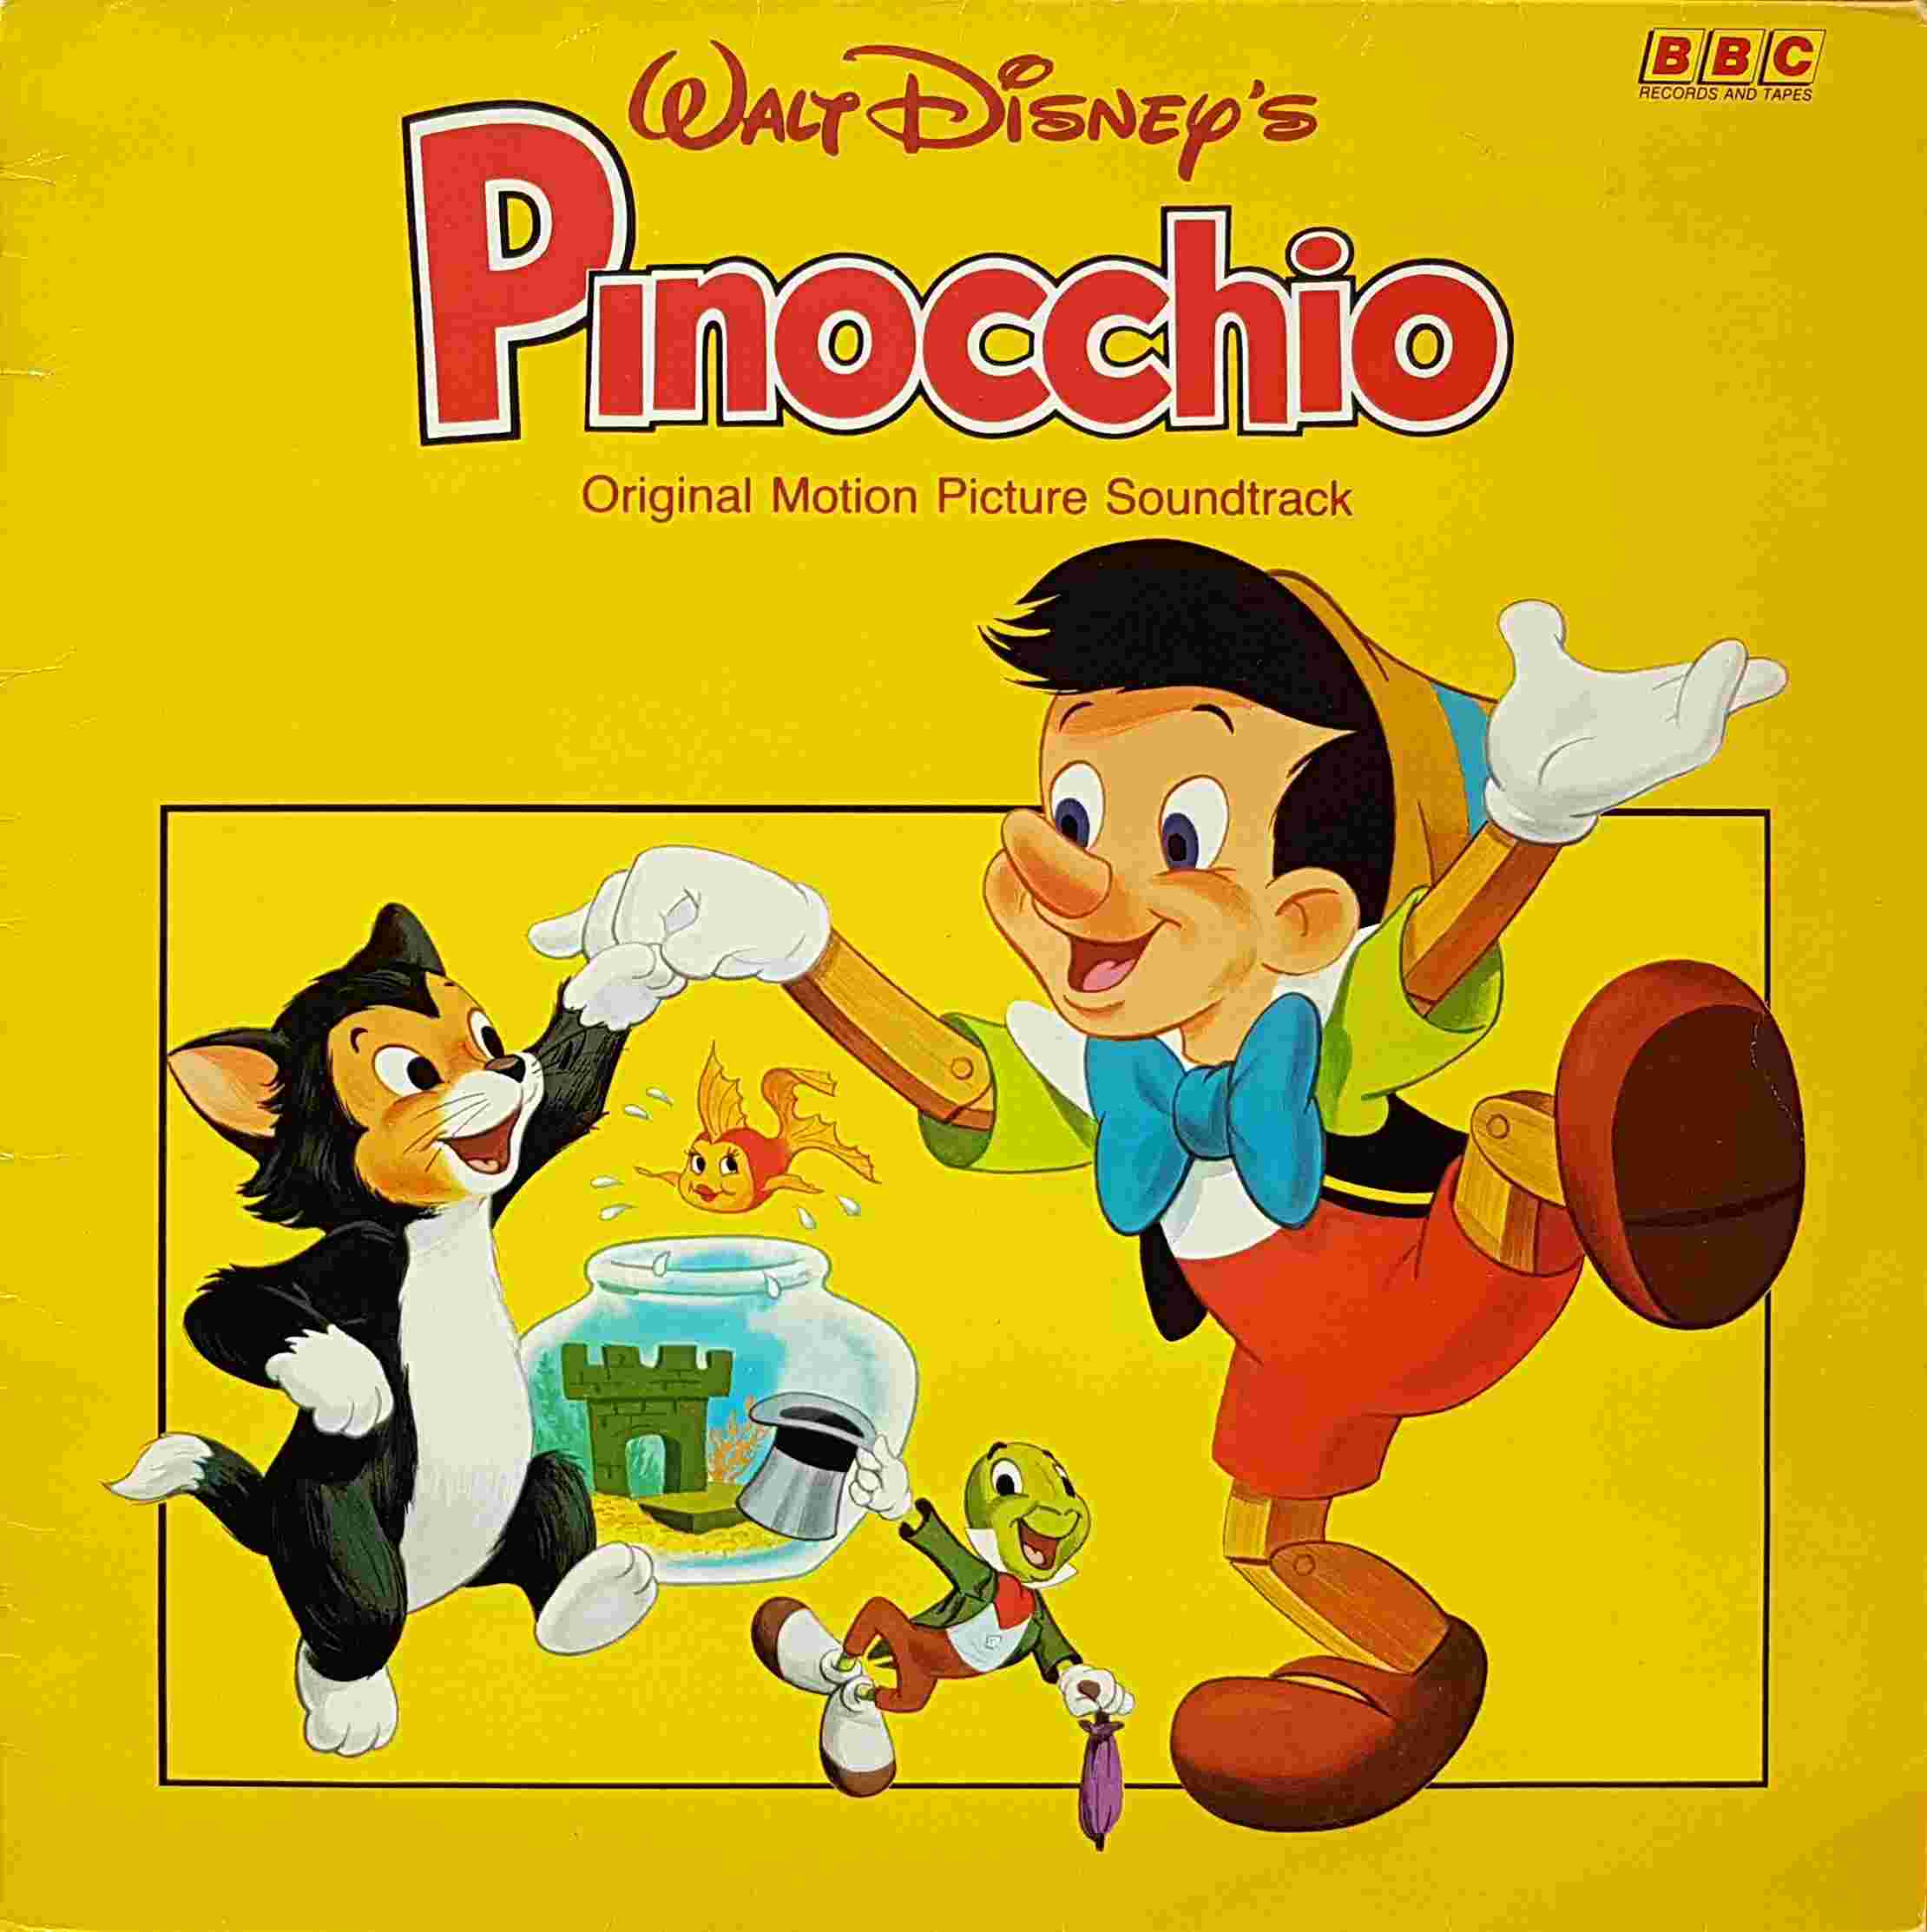 Picture of REC 540 Pinocchio by artist Leigh Harline / Ned Washington / Paul J. Smith / Ed Plumb from the BBC albums - Records and Tapes library